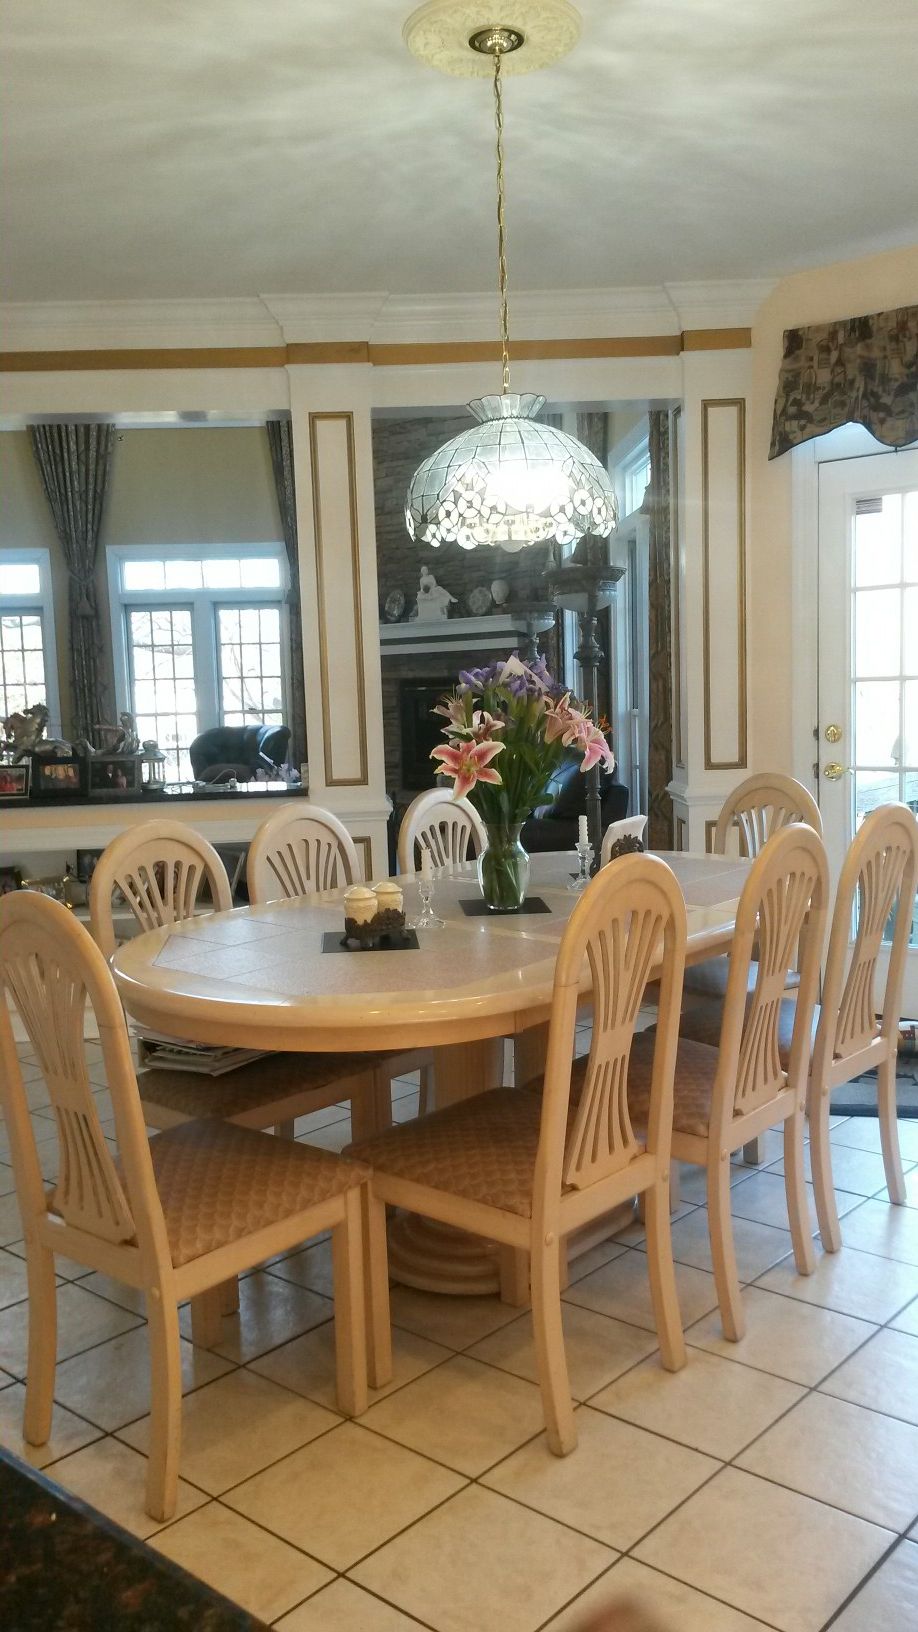 Gorgeous custom made solid maple wood dining set